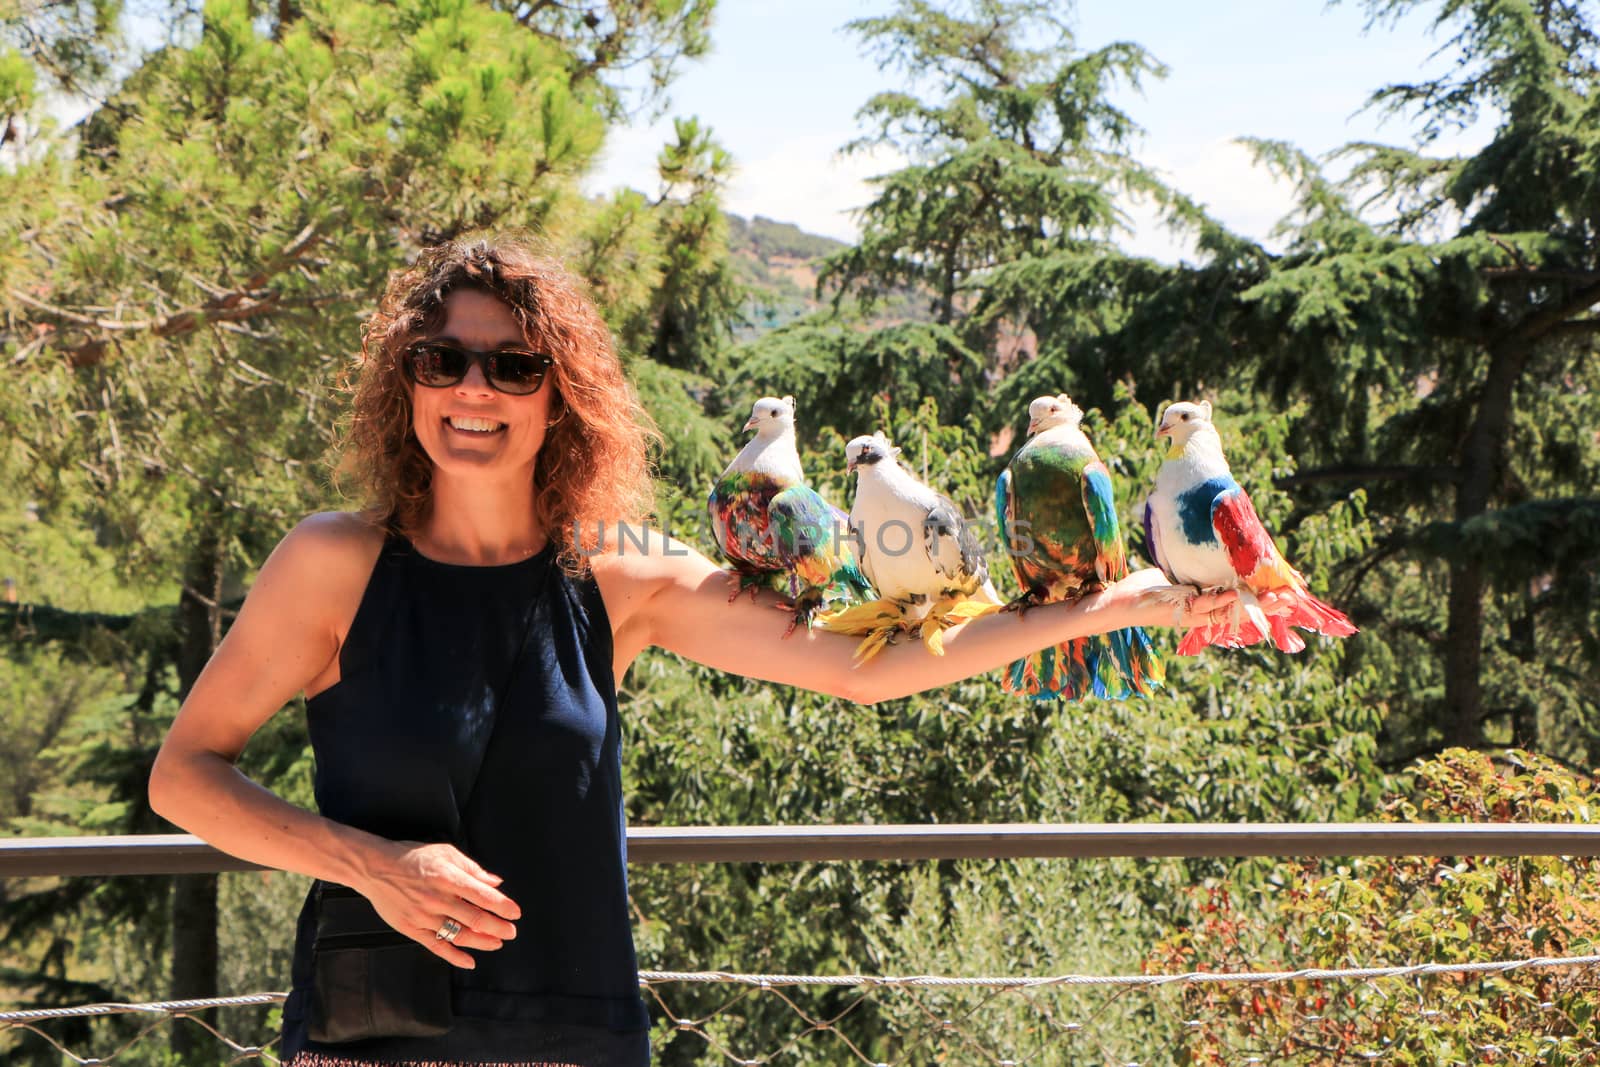 Amazingly beautiful birds in the Park Guell on the beautiful young girl.